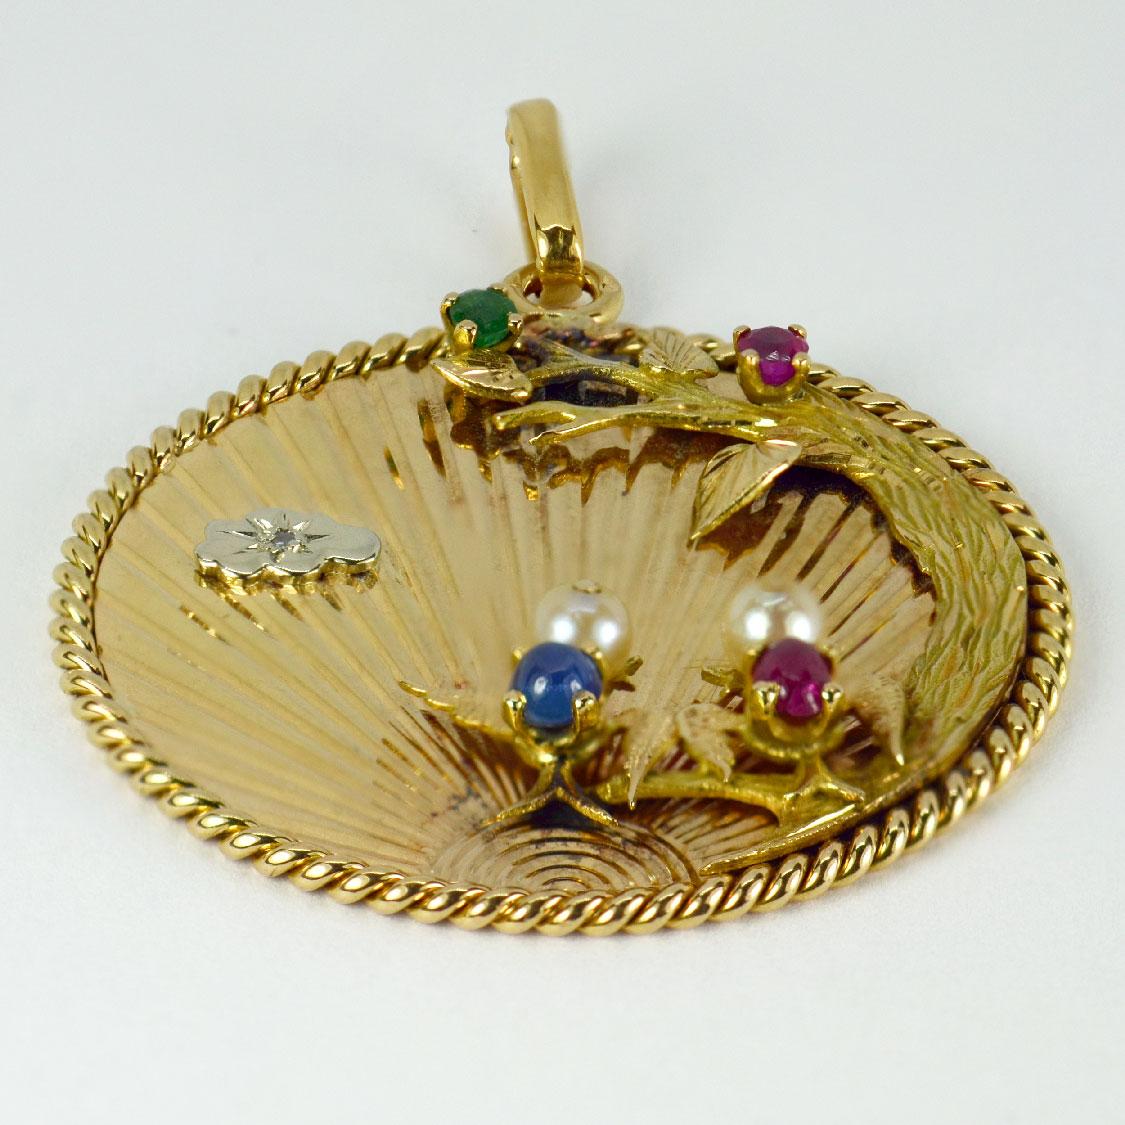 A French 18 karat (18K) yellow gold pendant depicting a pair of lovebirds on a branch in front of the setting sun. Set with a faceted emerald, ruby and diamond, a cabochon ruby and sapphire and two cultured pearls. 

Engraved to the reverse ‘Brulure